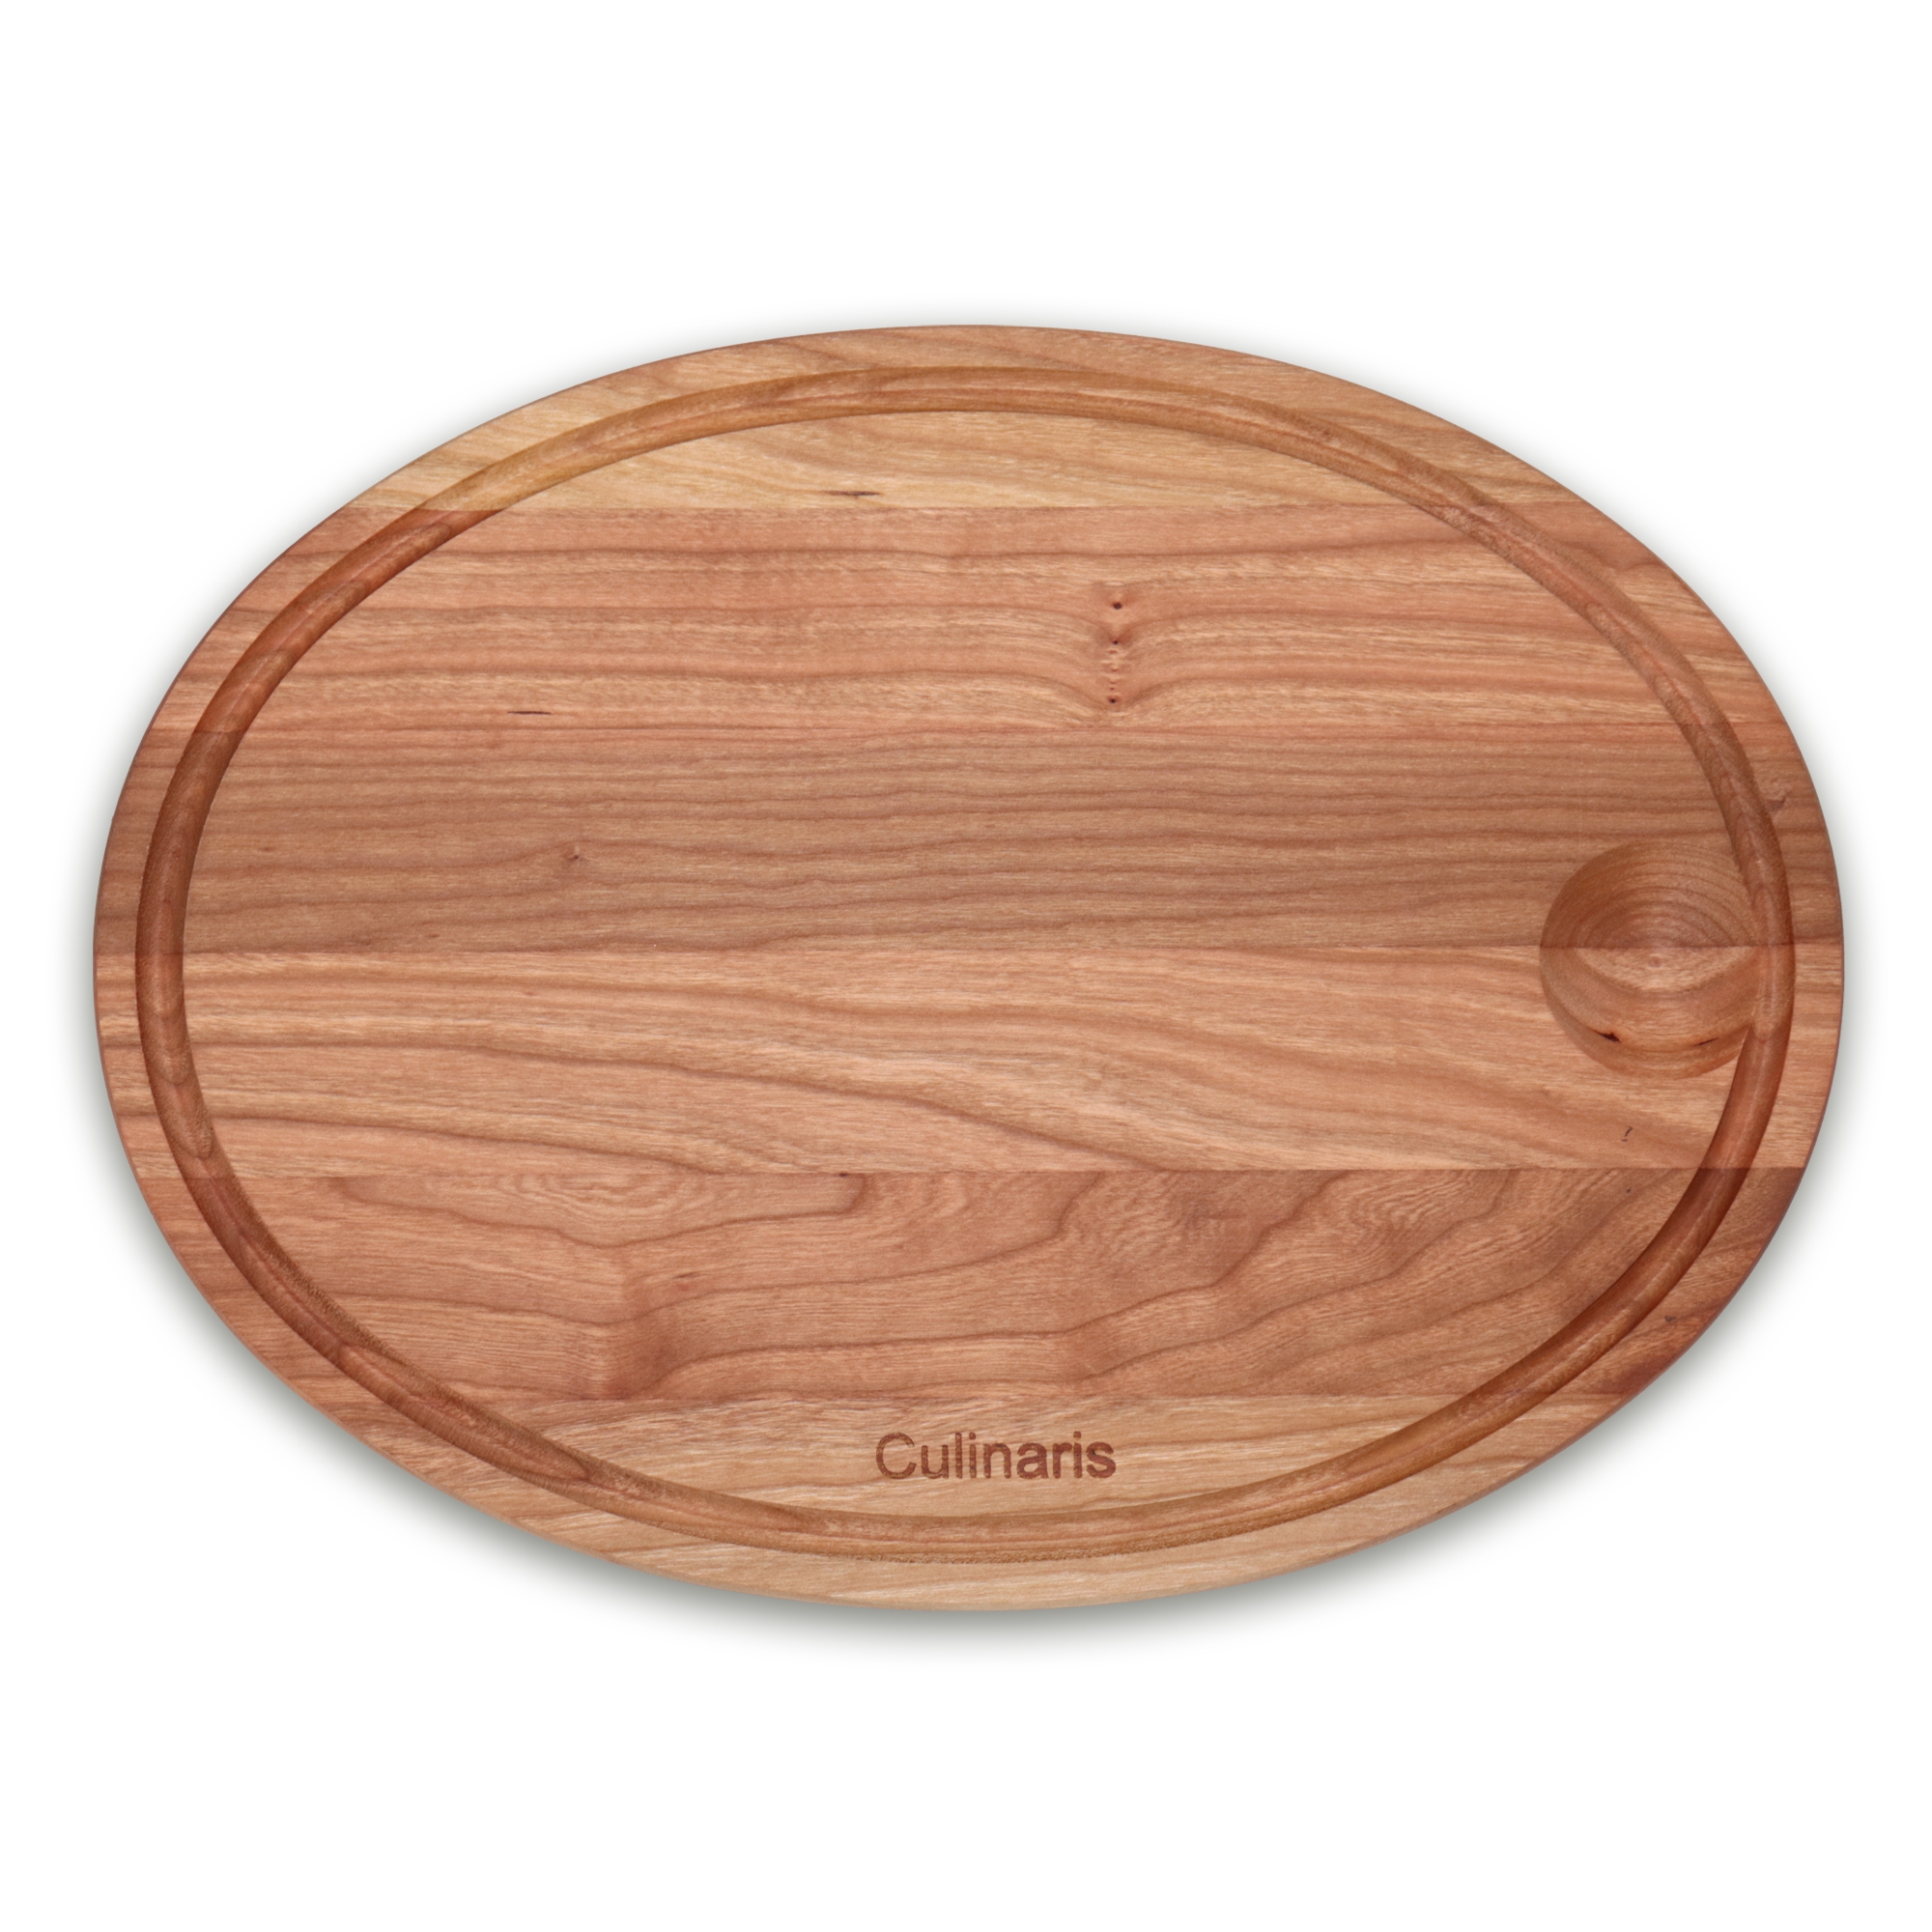 Culinaris - oval carving board made of cherry wood